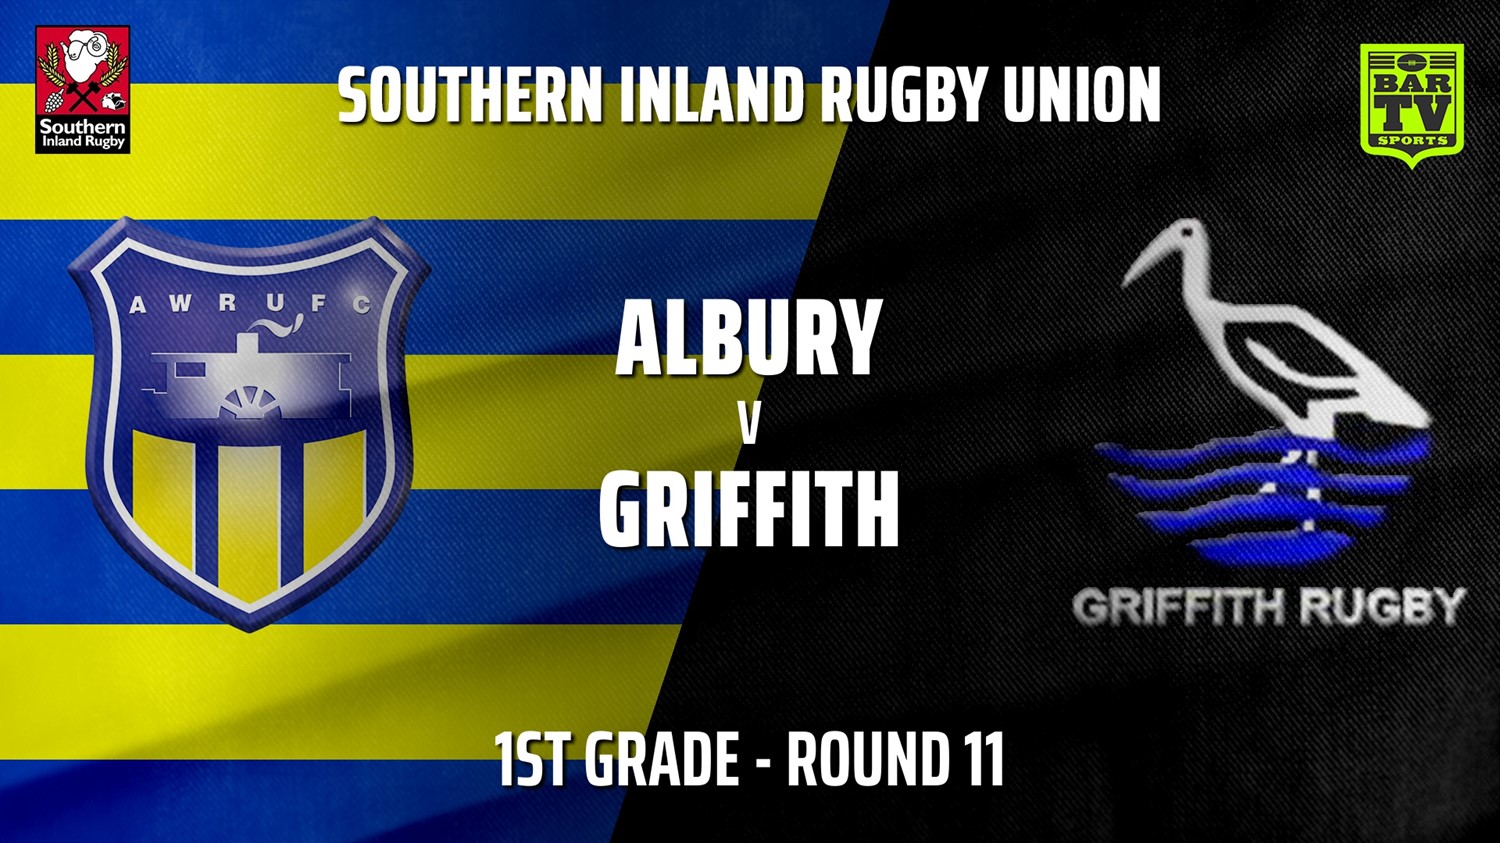 210710-Southern Inland Rugby Union Round 11 - 1st Grade - Albury Steamers v Griffith Slate Image